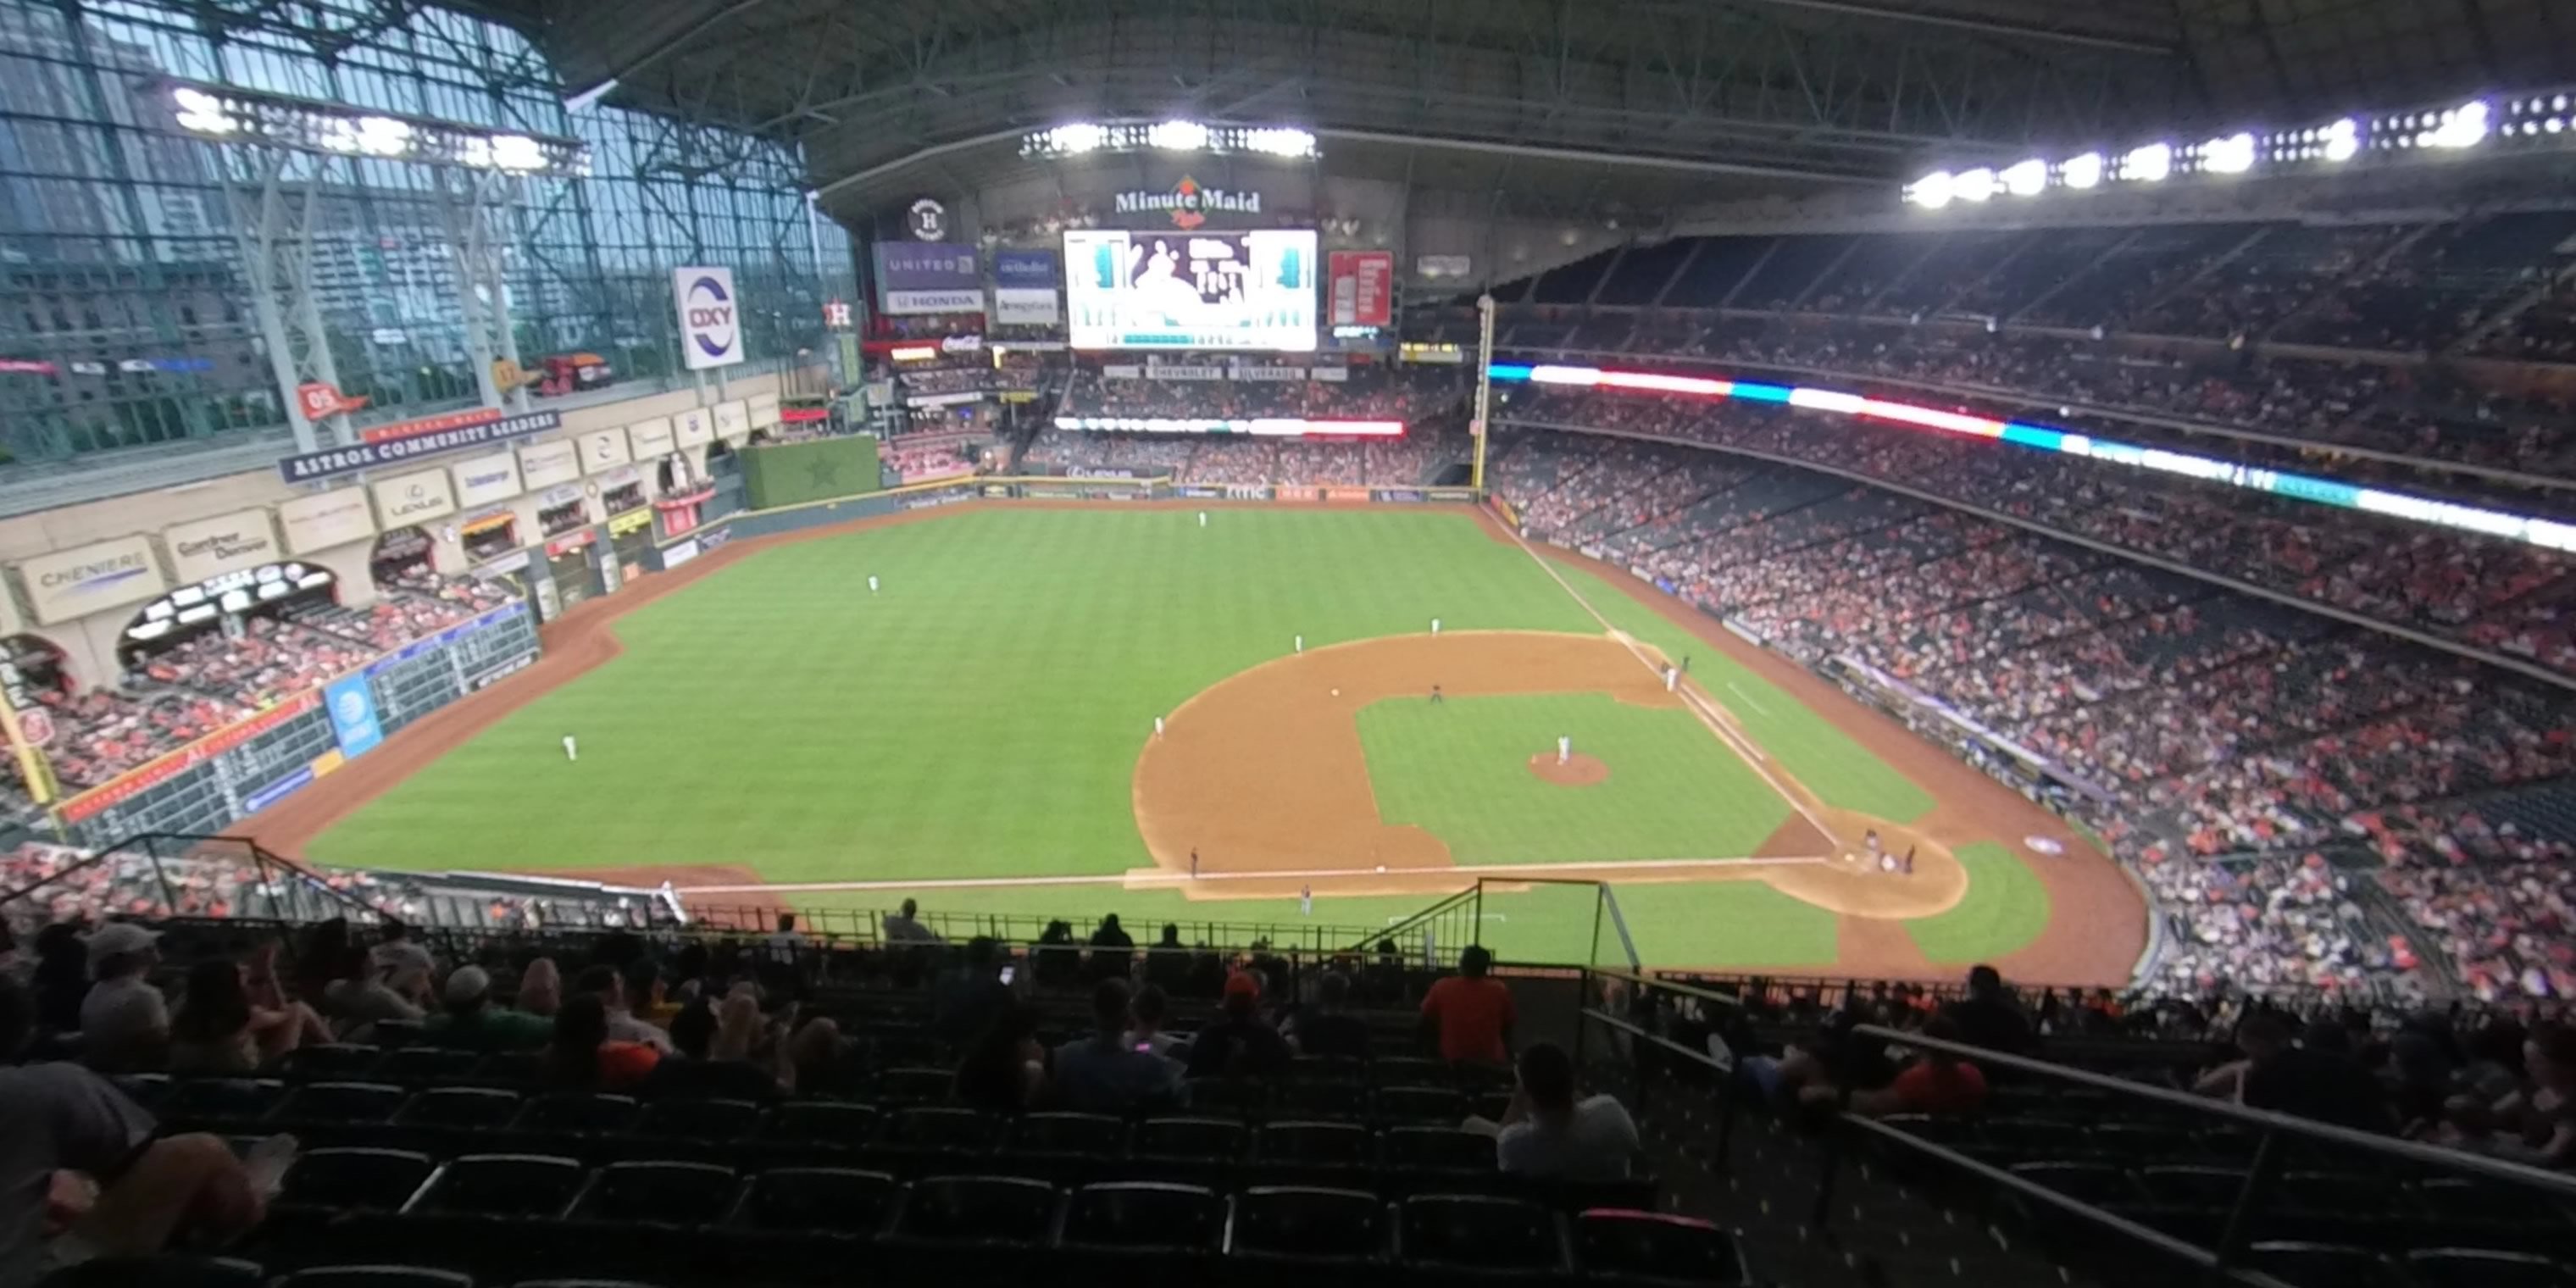 section 411 panoramic seat view  for baseball - minute maid park